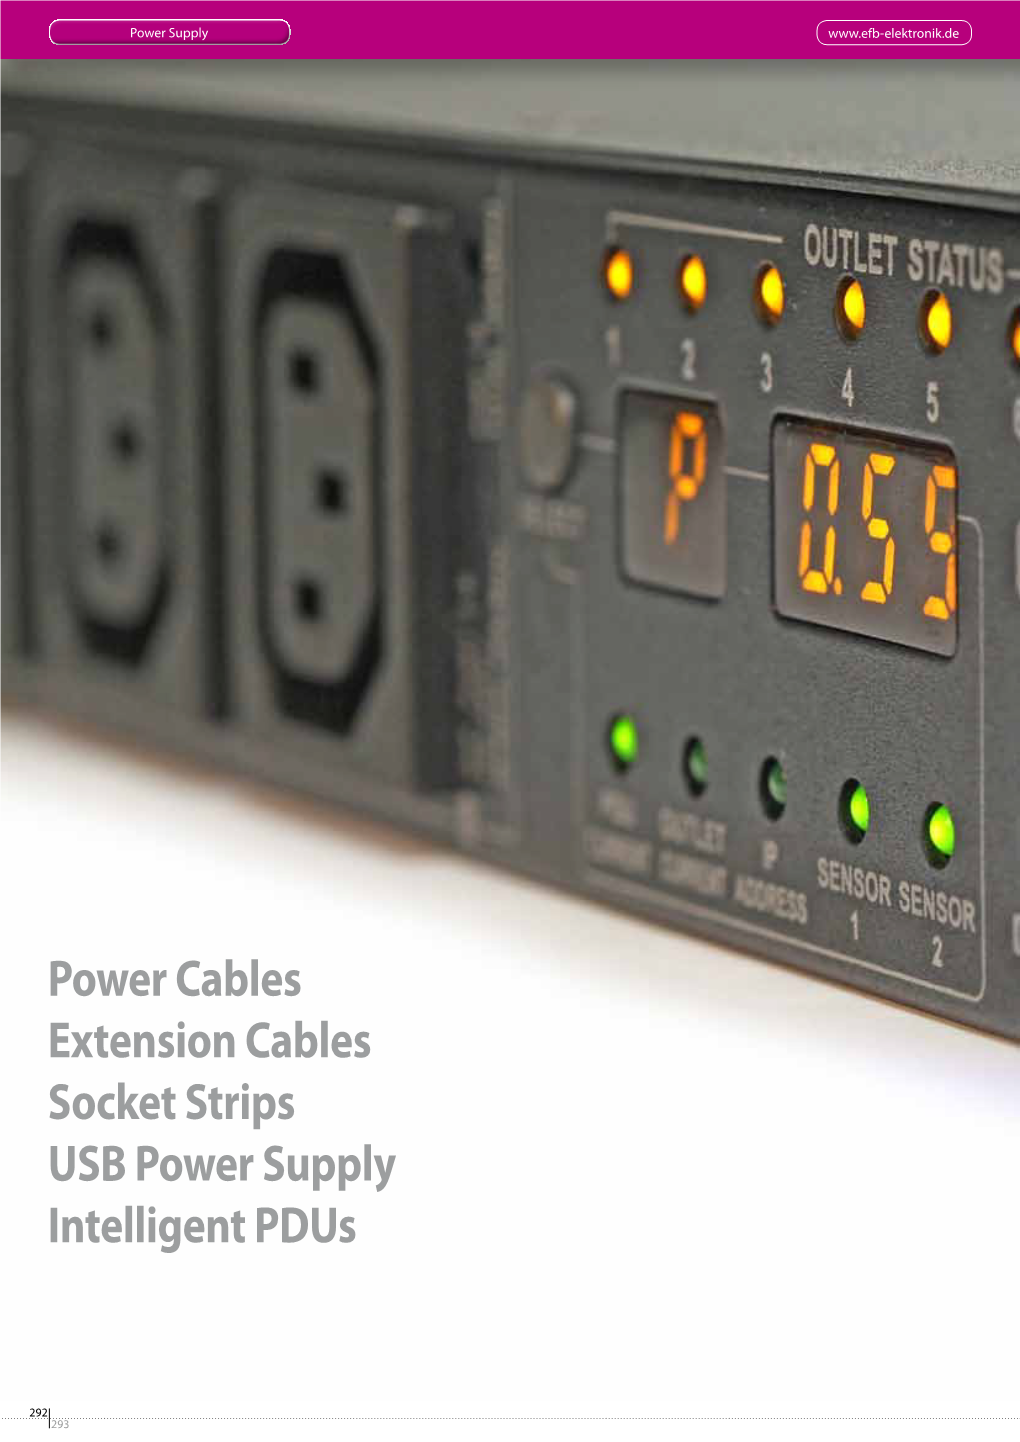 Power Cables Extension Cables Socket Strips USB Power Supply Intelligent Pdus